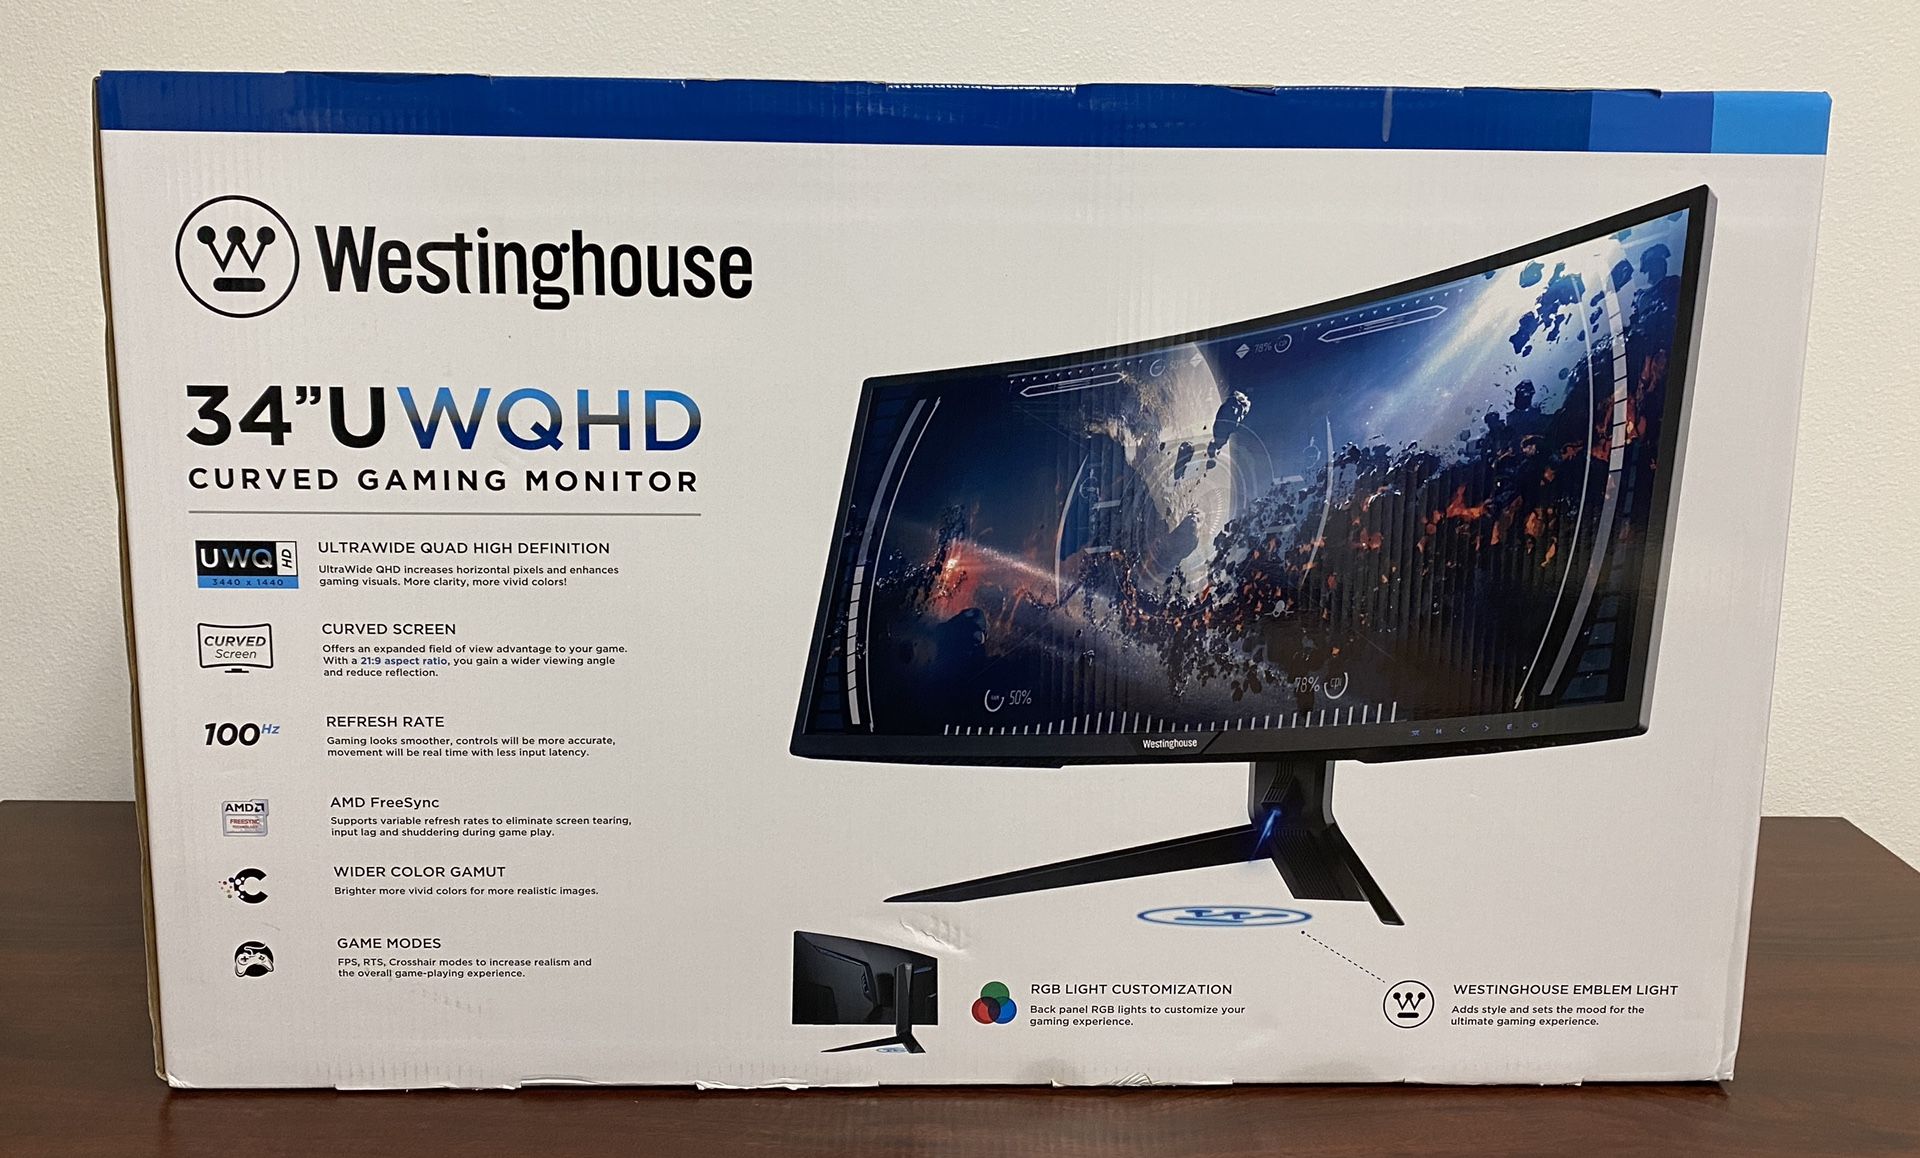 Westinghouse 34” UWQHD Curved Gaming Monitor